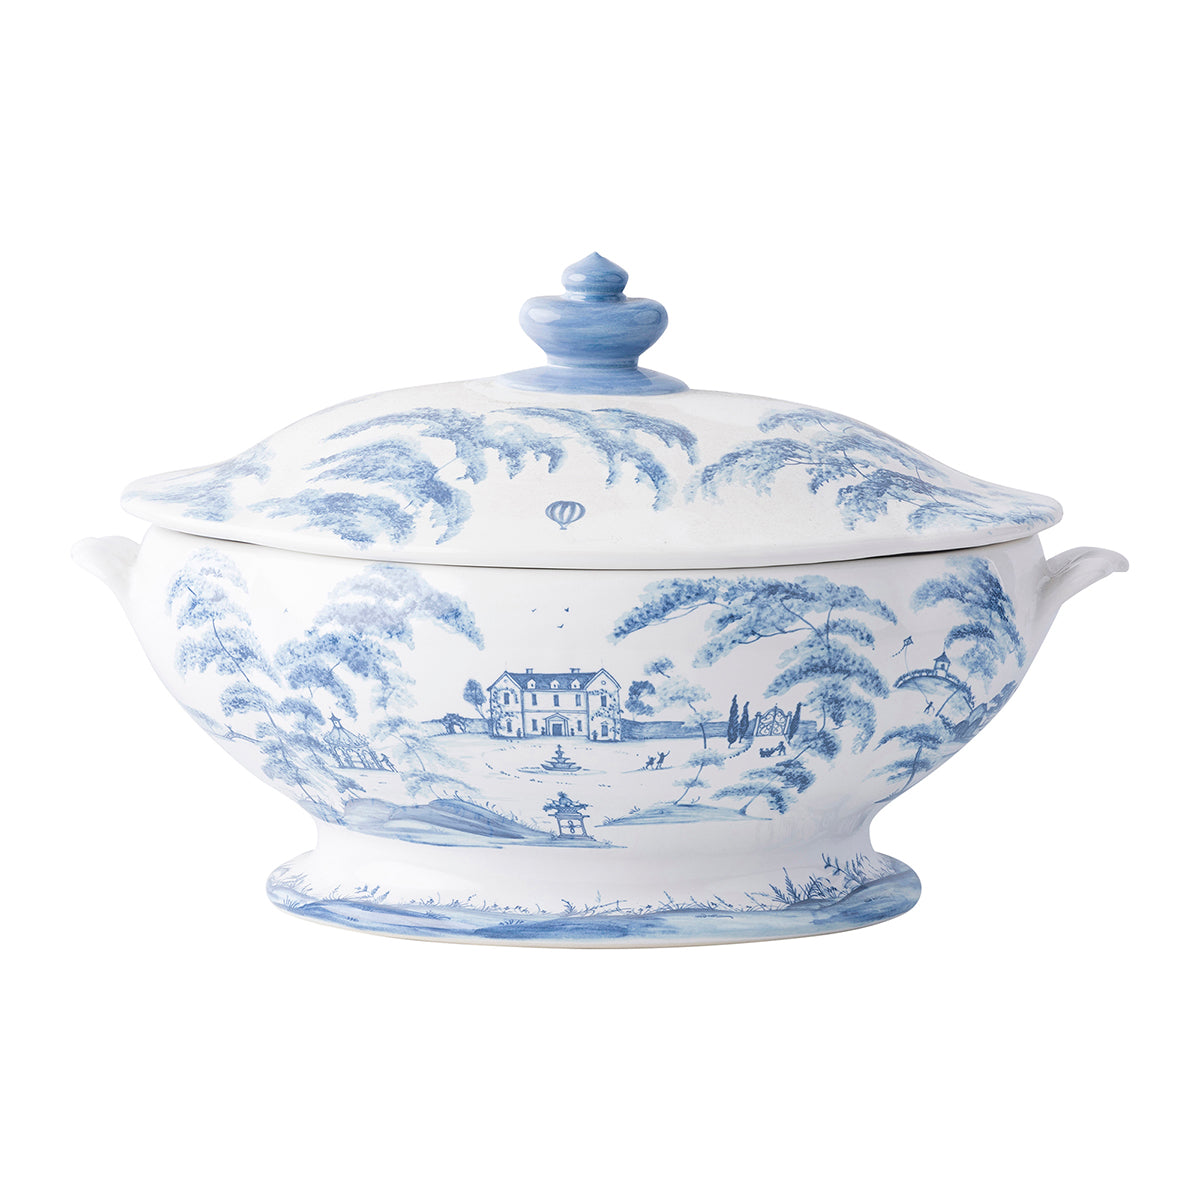 From our Country Estate Collection- As an unforgettable wedding gift or a showstopper for your own table, this covered tureen is as picturesque as it is oven-to-table practical. Sweeping vistas of the Main House adorn the exterior, while a scene of the Garden Conservatory graces the interior basin - making this intricately detailed vessel feel like an heirloom piece.